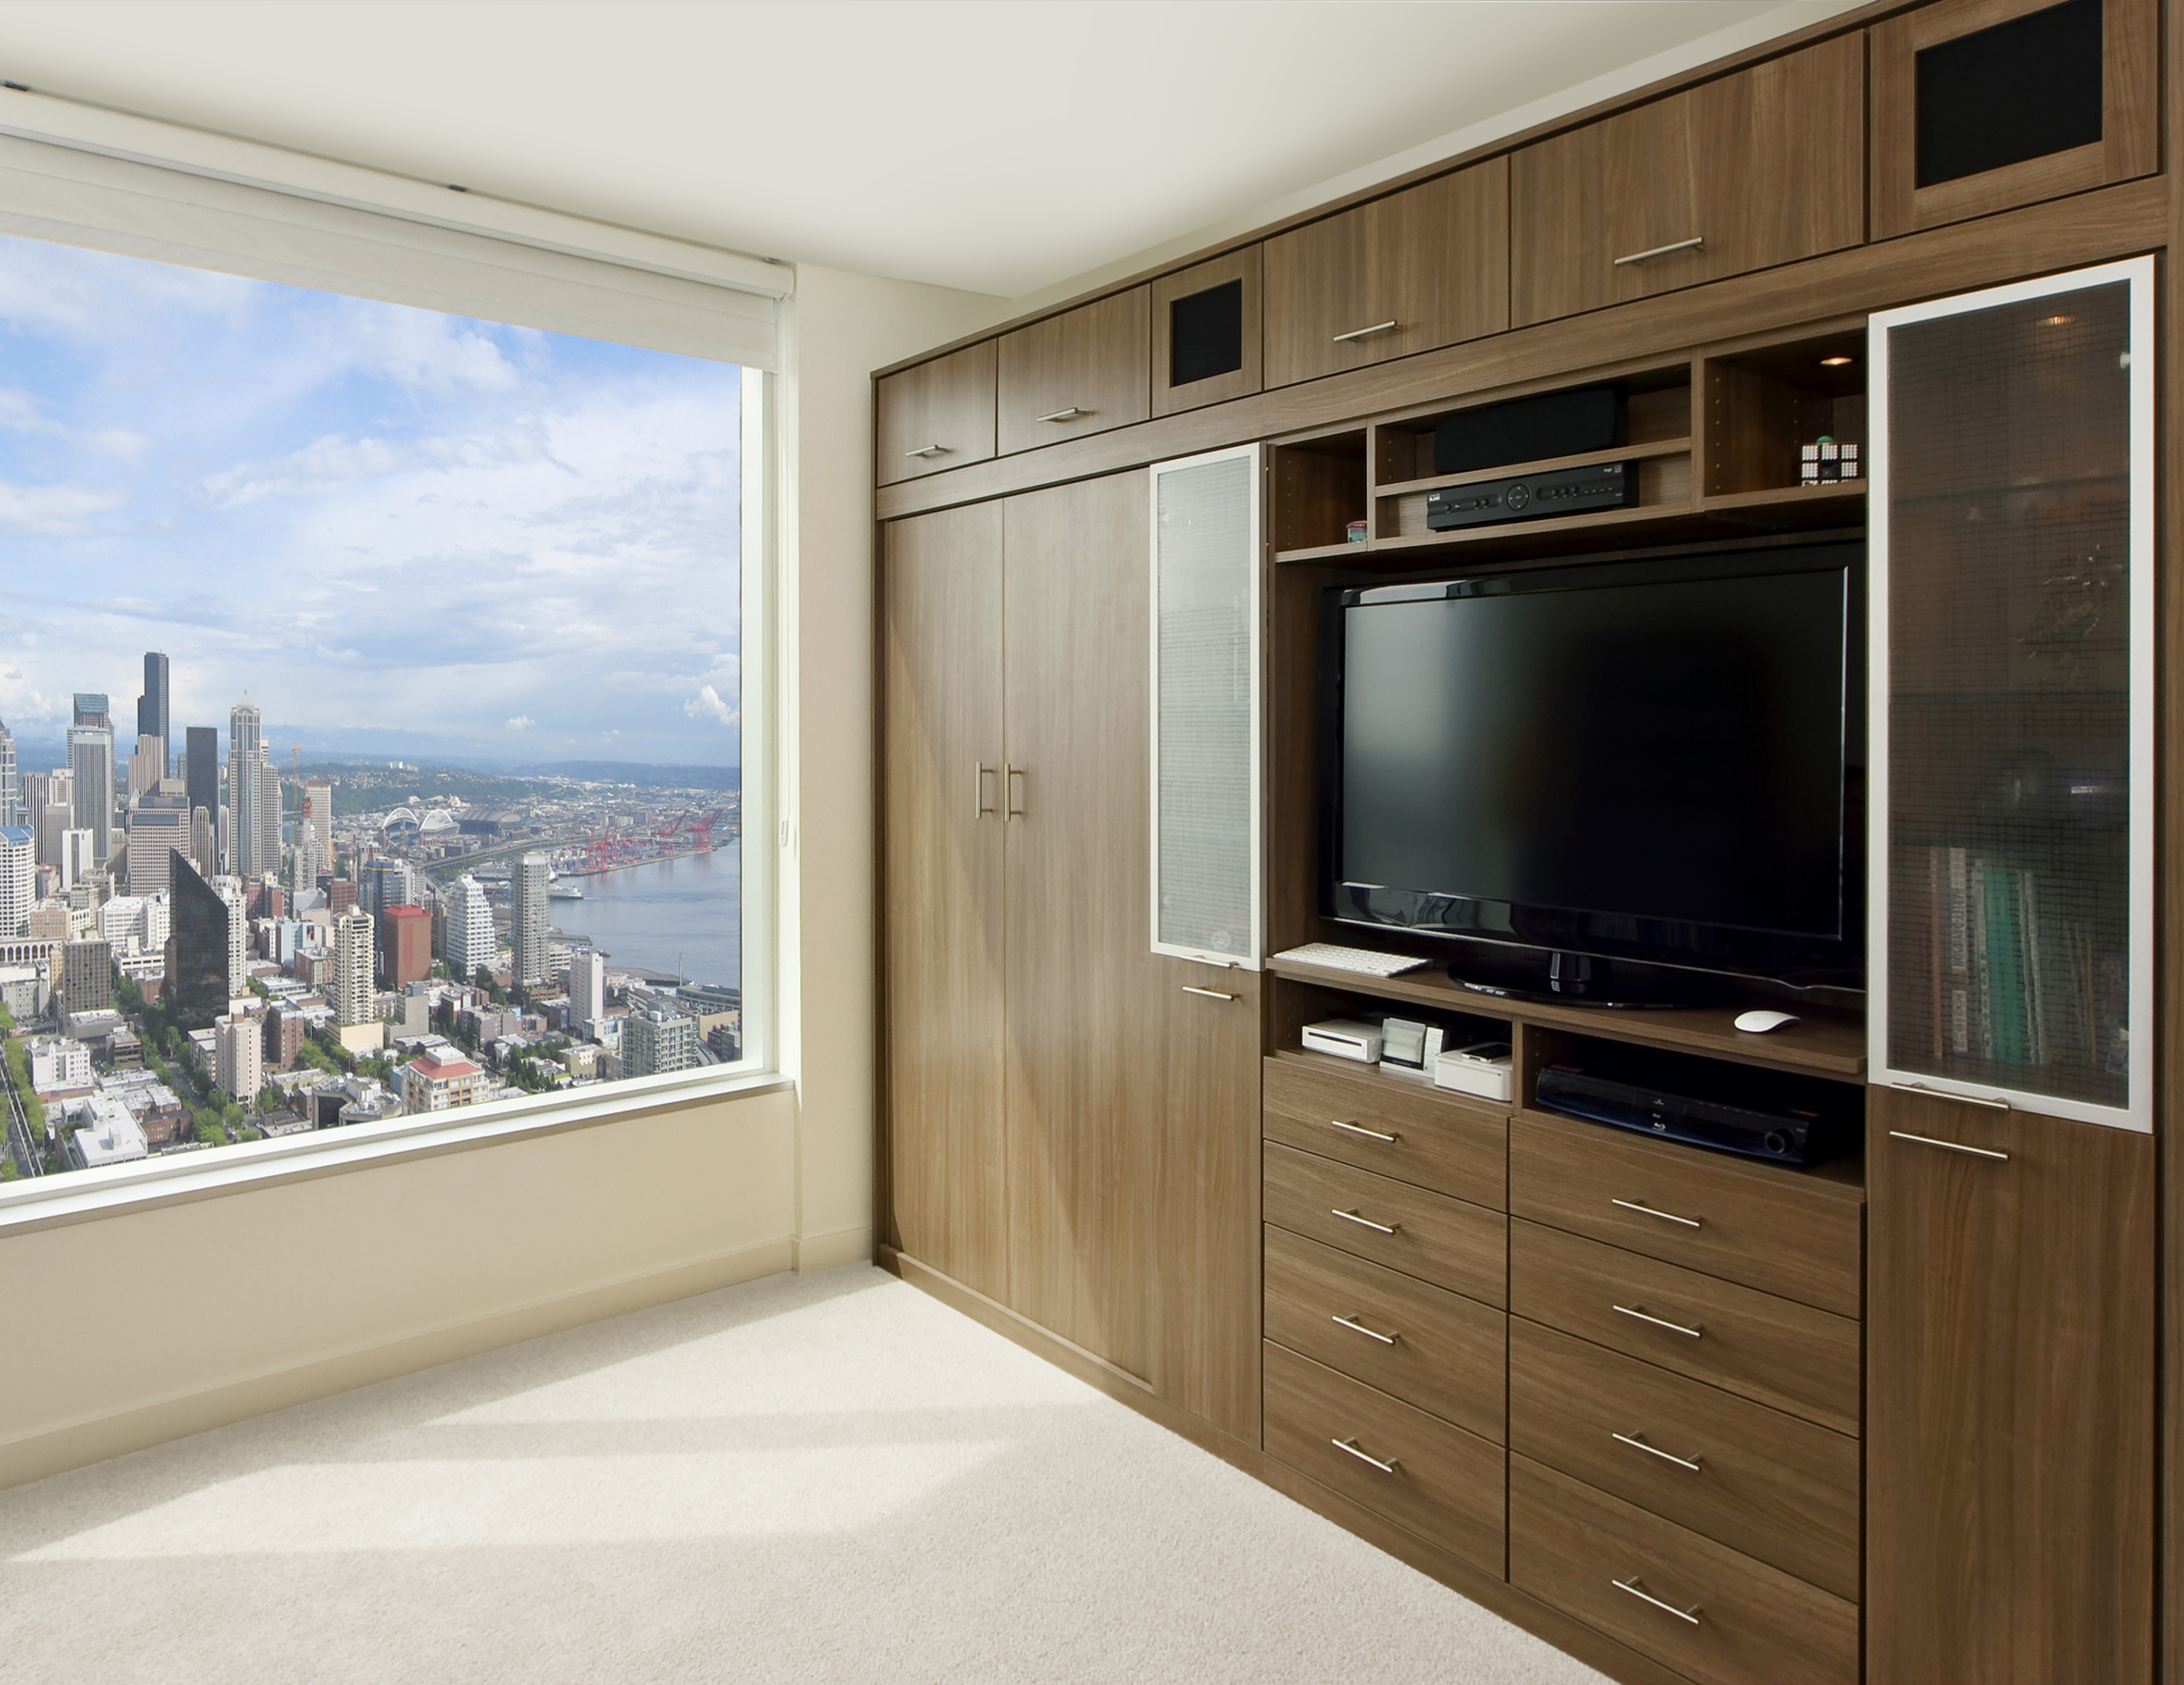 California Closets Monterey - Get Organized with Custom Cabinets and Storage Systems